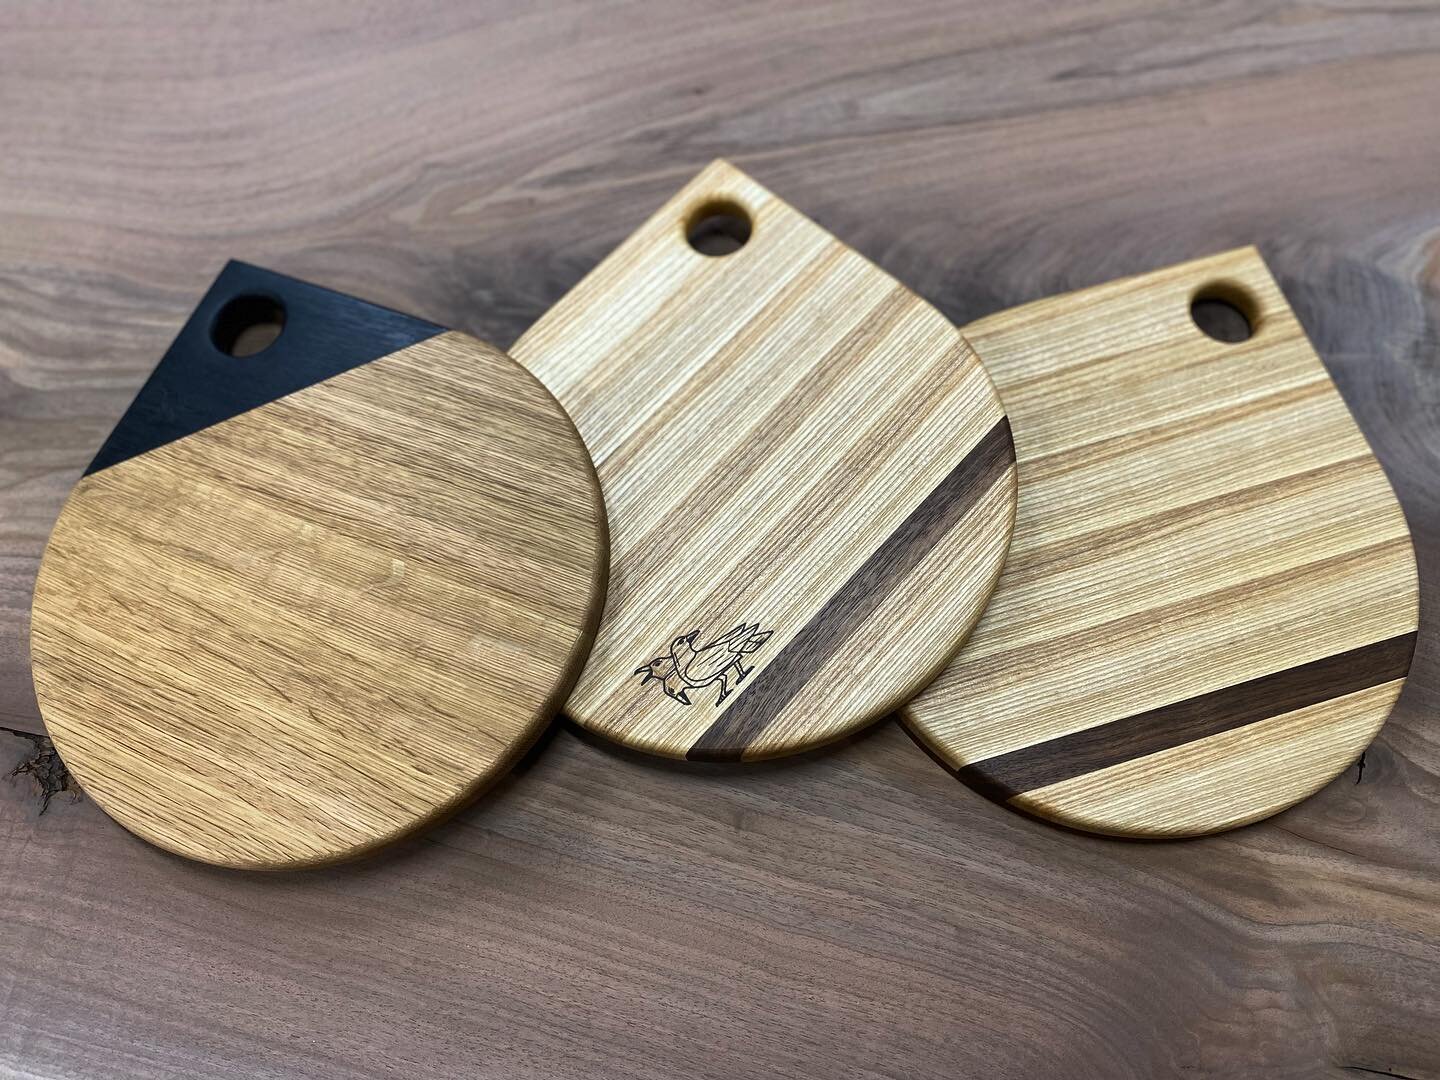 There&rsquo;s a handful of these teardrop boards available!
.
DM if ya want one!
.
#servingboard #xmasgift #teardrop #niftygifty